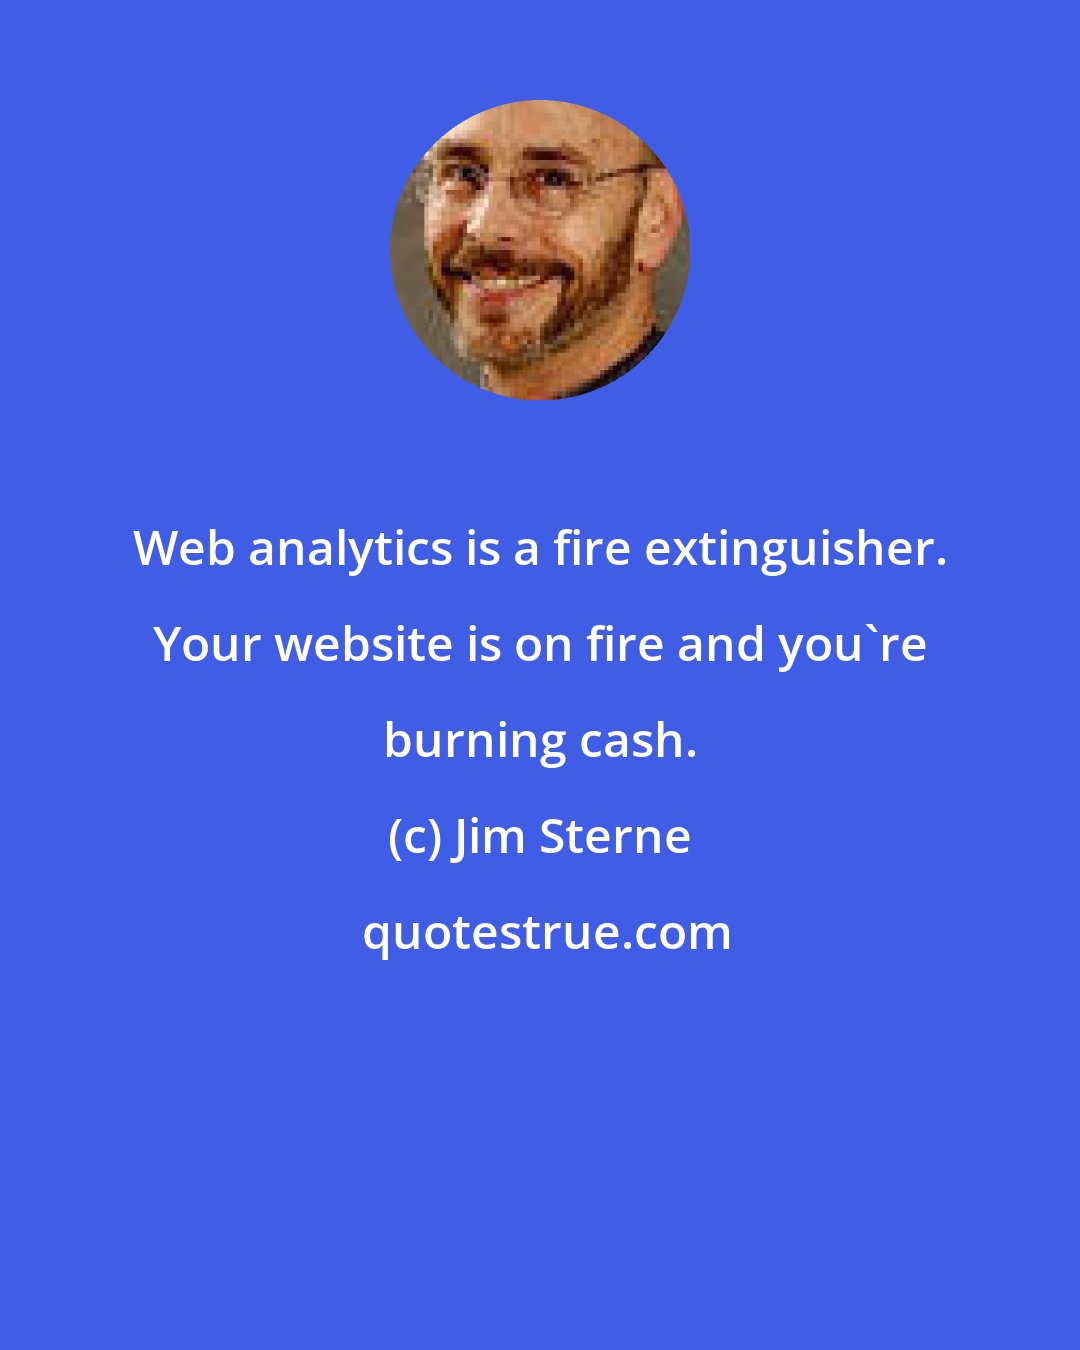 Jim Sterne: Web analytics is a fire extinguisher. Your website is on fire and you're burning cash.